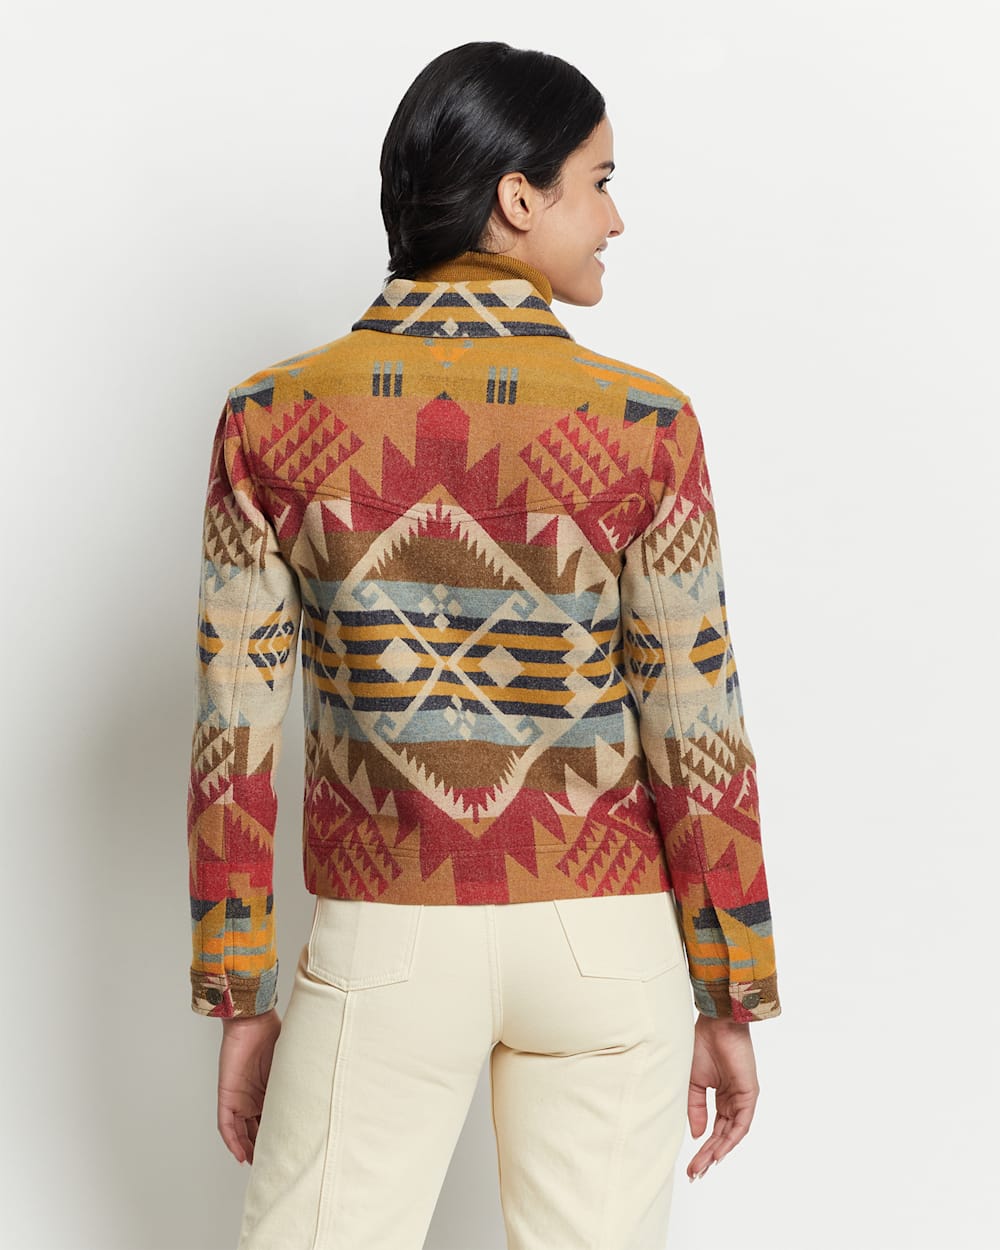 ALTERNATE VIEW OF WOMEN'S LIMITED EDITION CARDWELL WOOL JACKET IN JOURNEY WEST MULTI image number 3